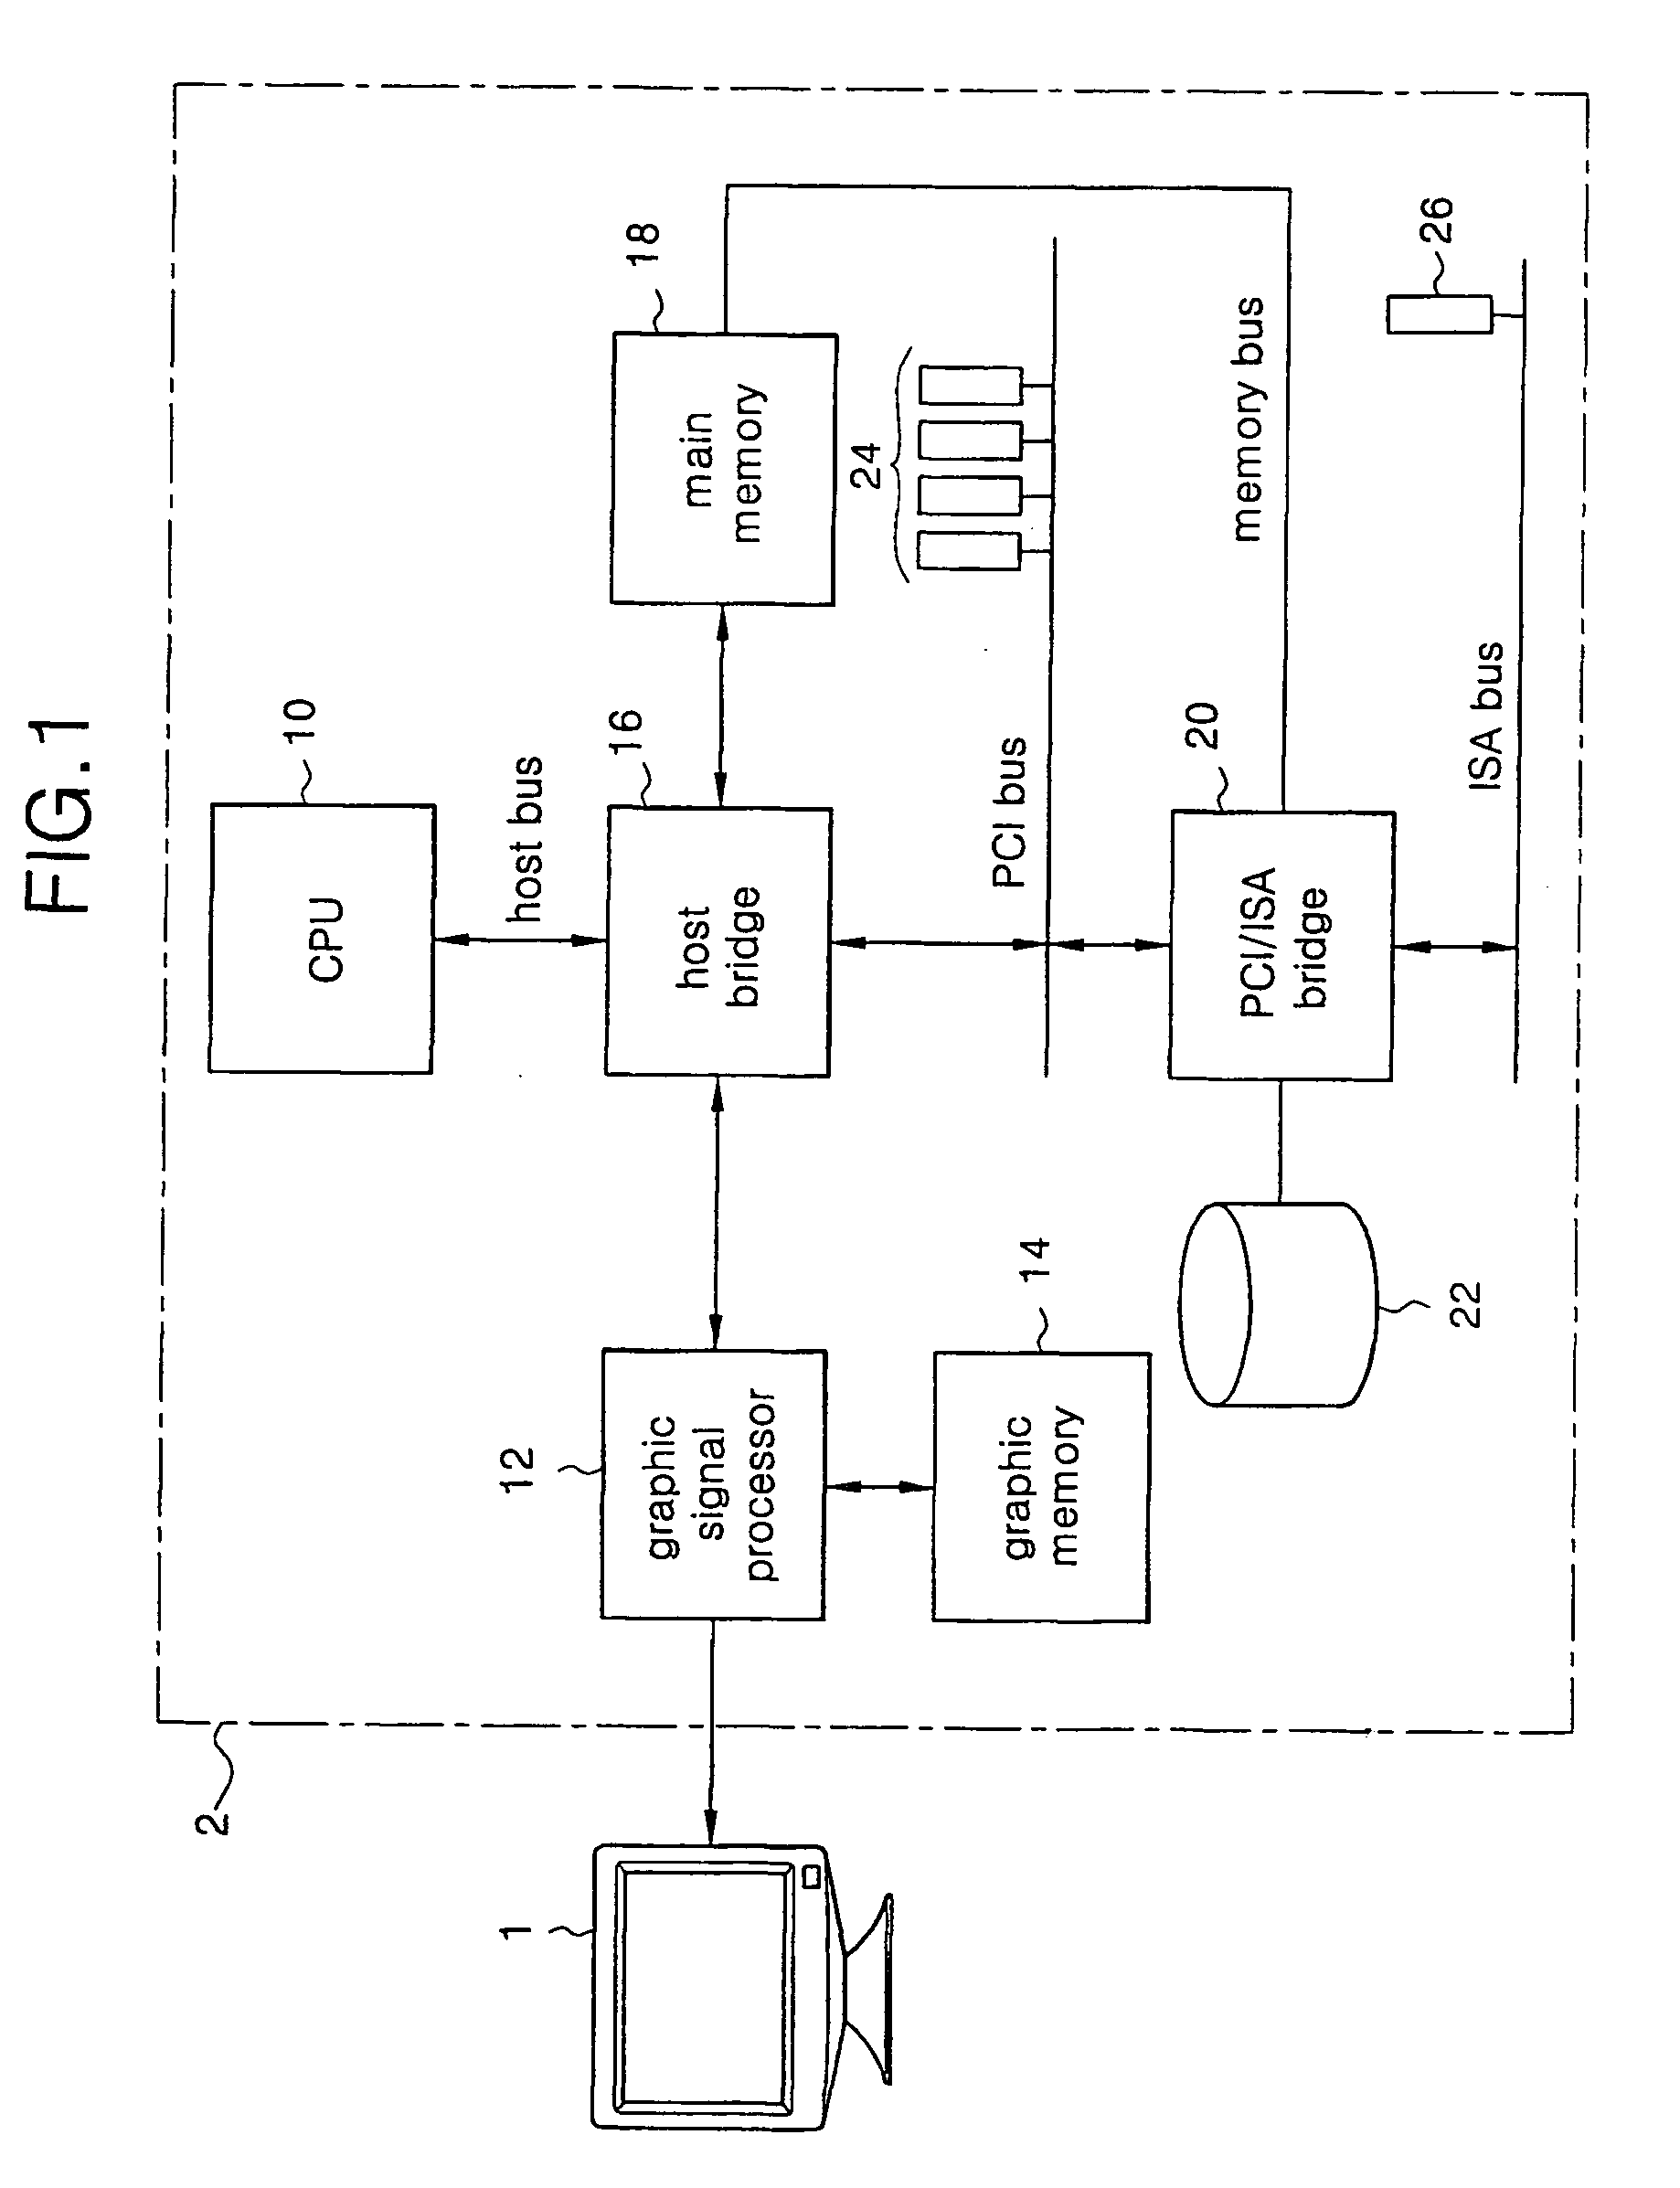 Chip design verifying and chip testing apparatus and method